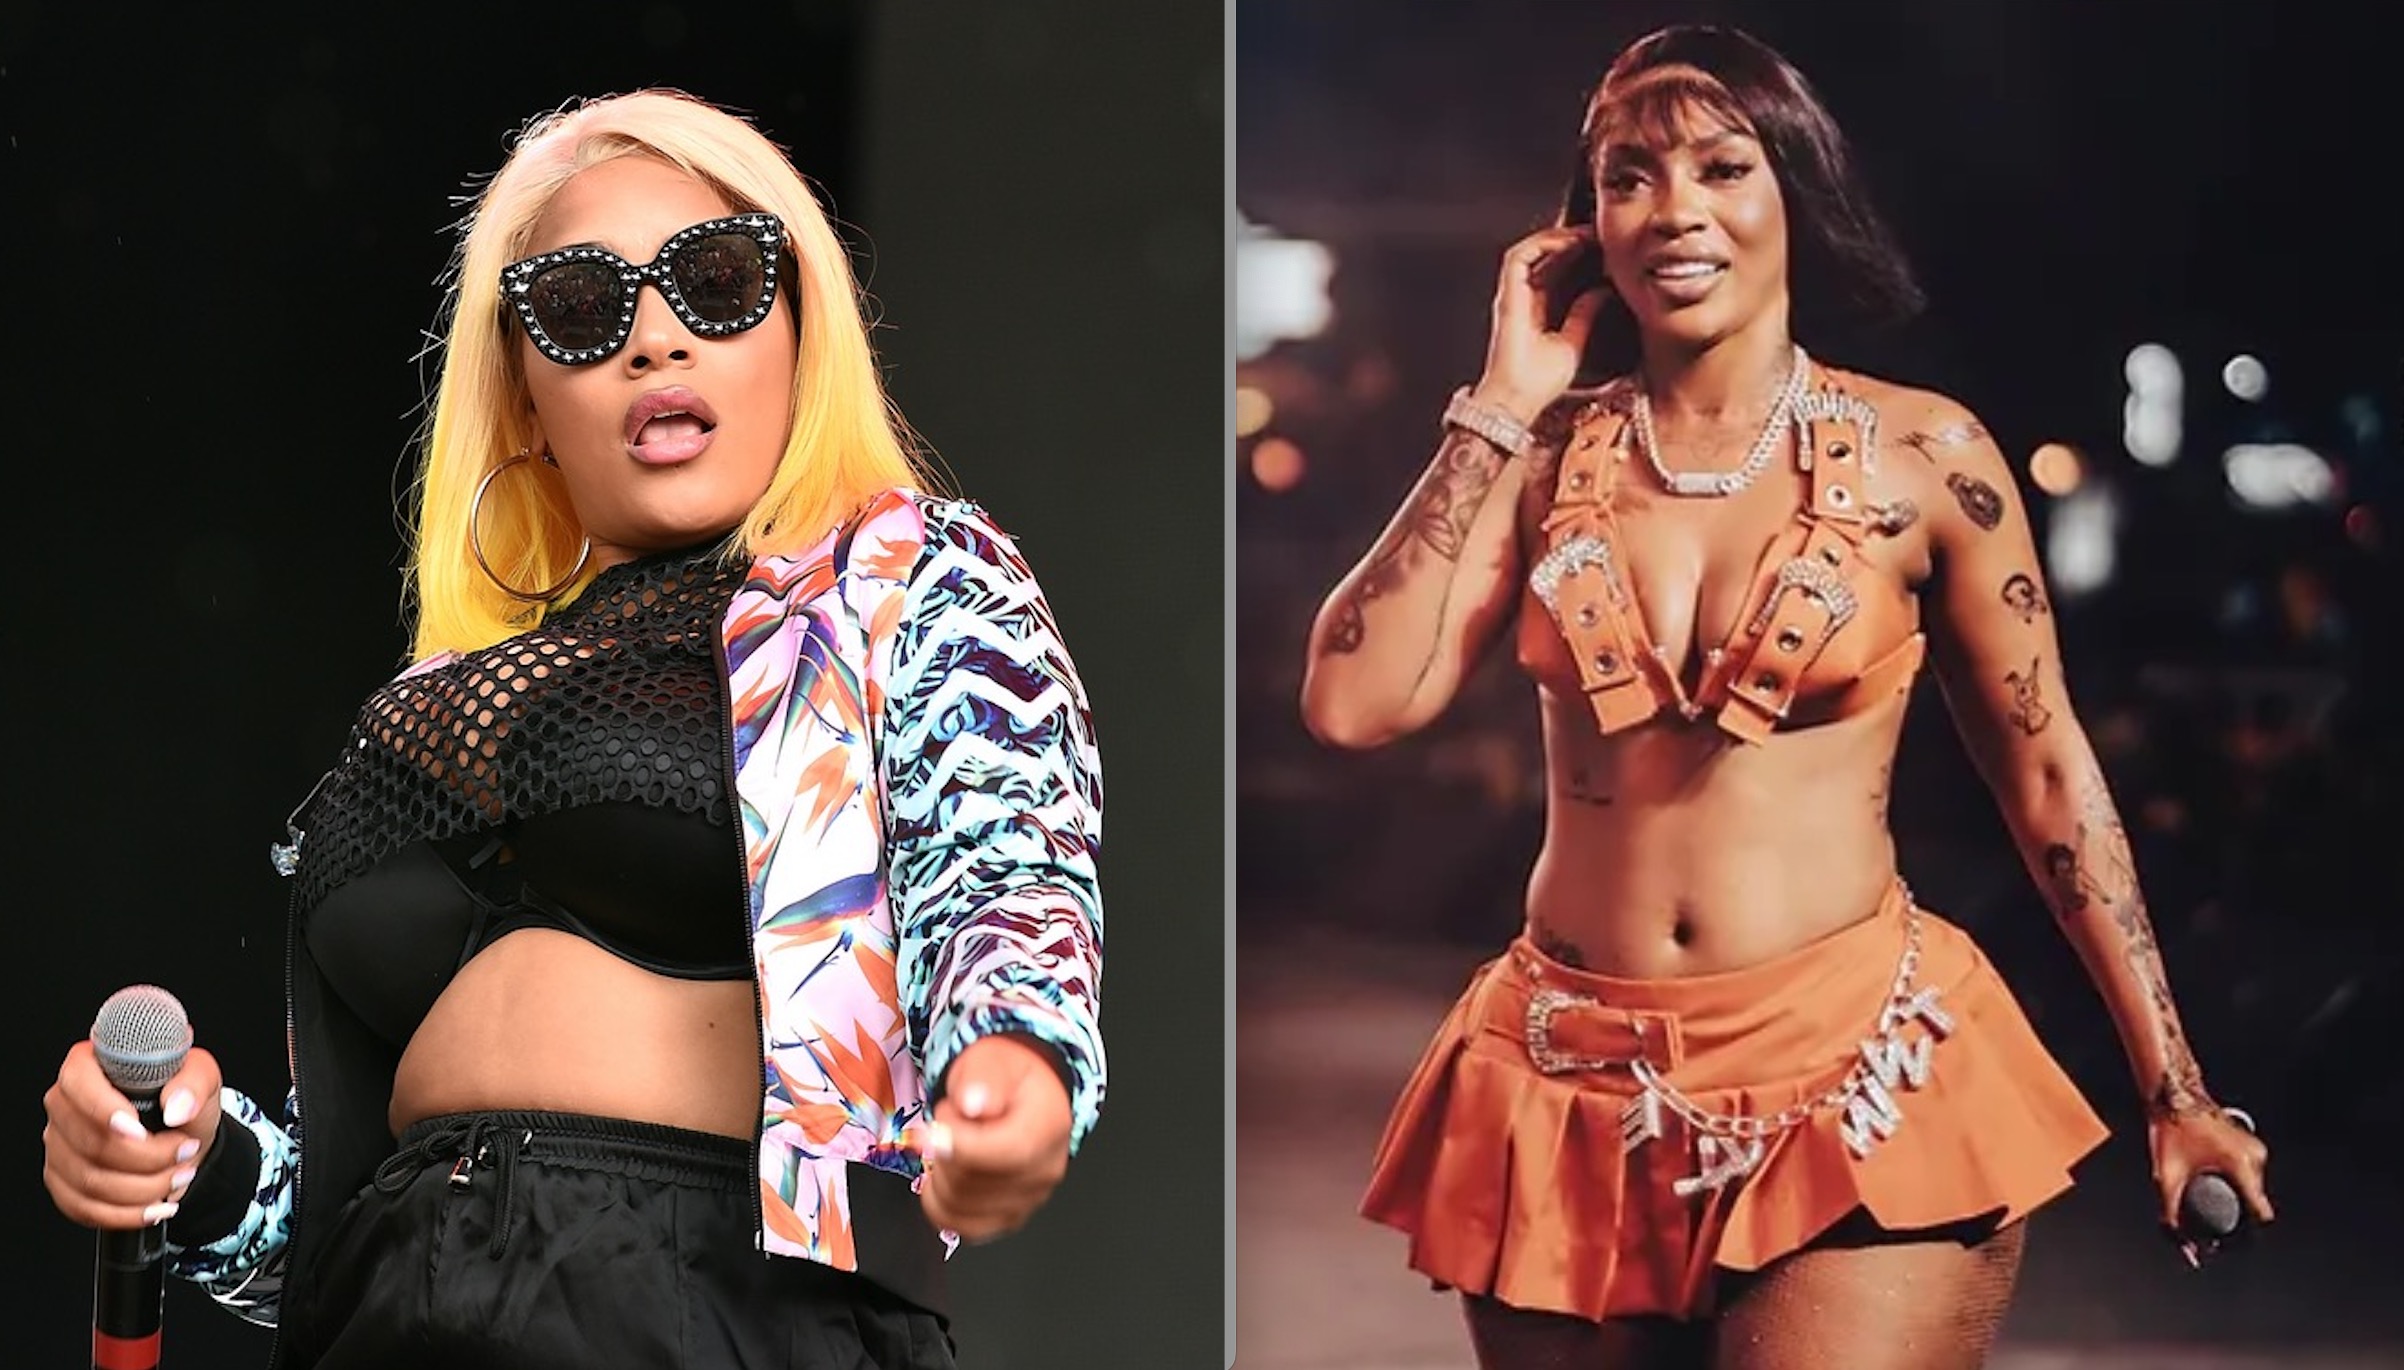 Stefflon Don Changes Lyrics to Diss Jada Directly; Jada Reacts and Previews Diss Track